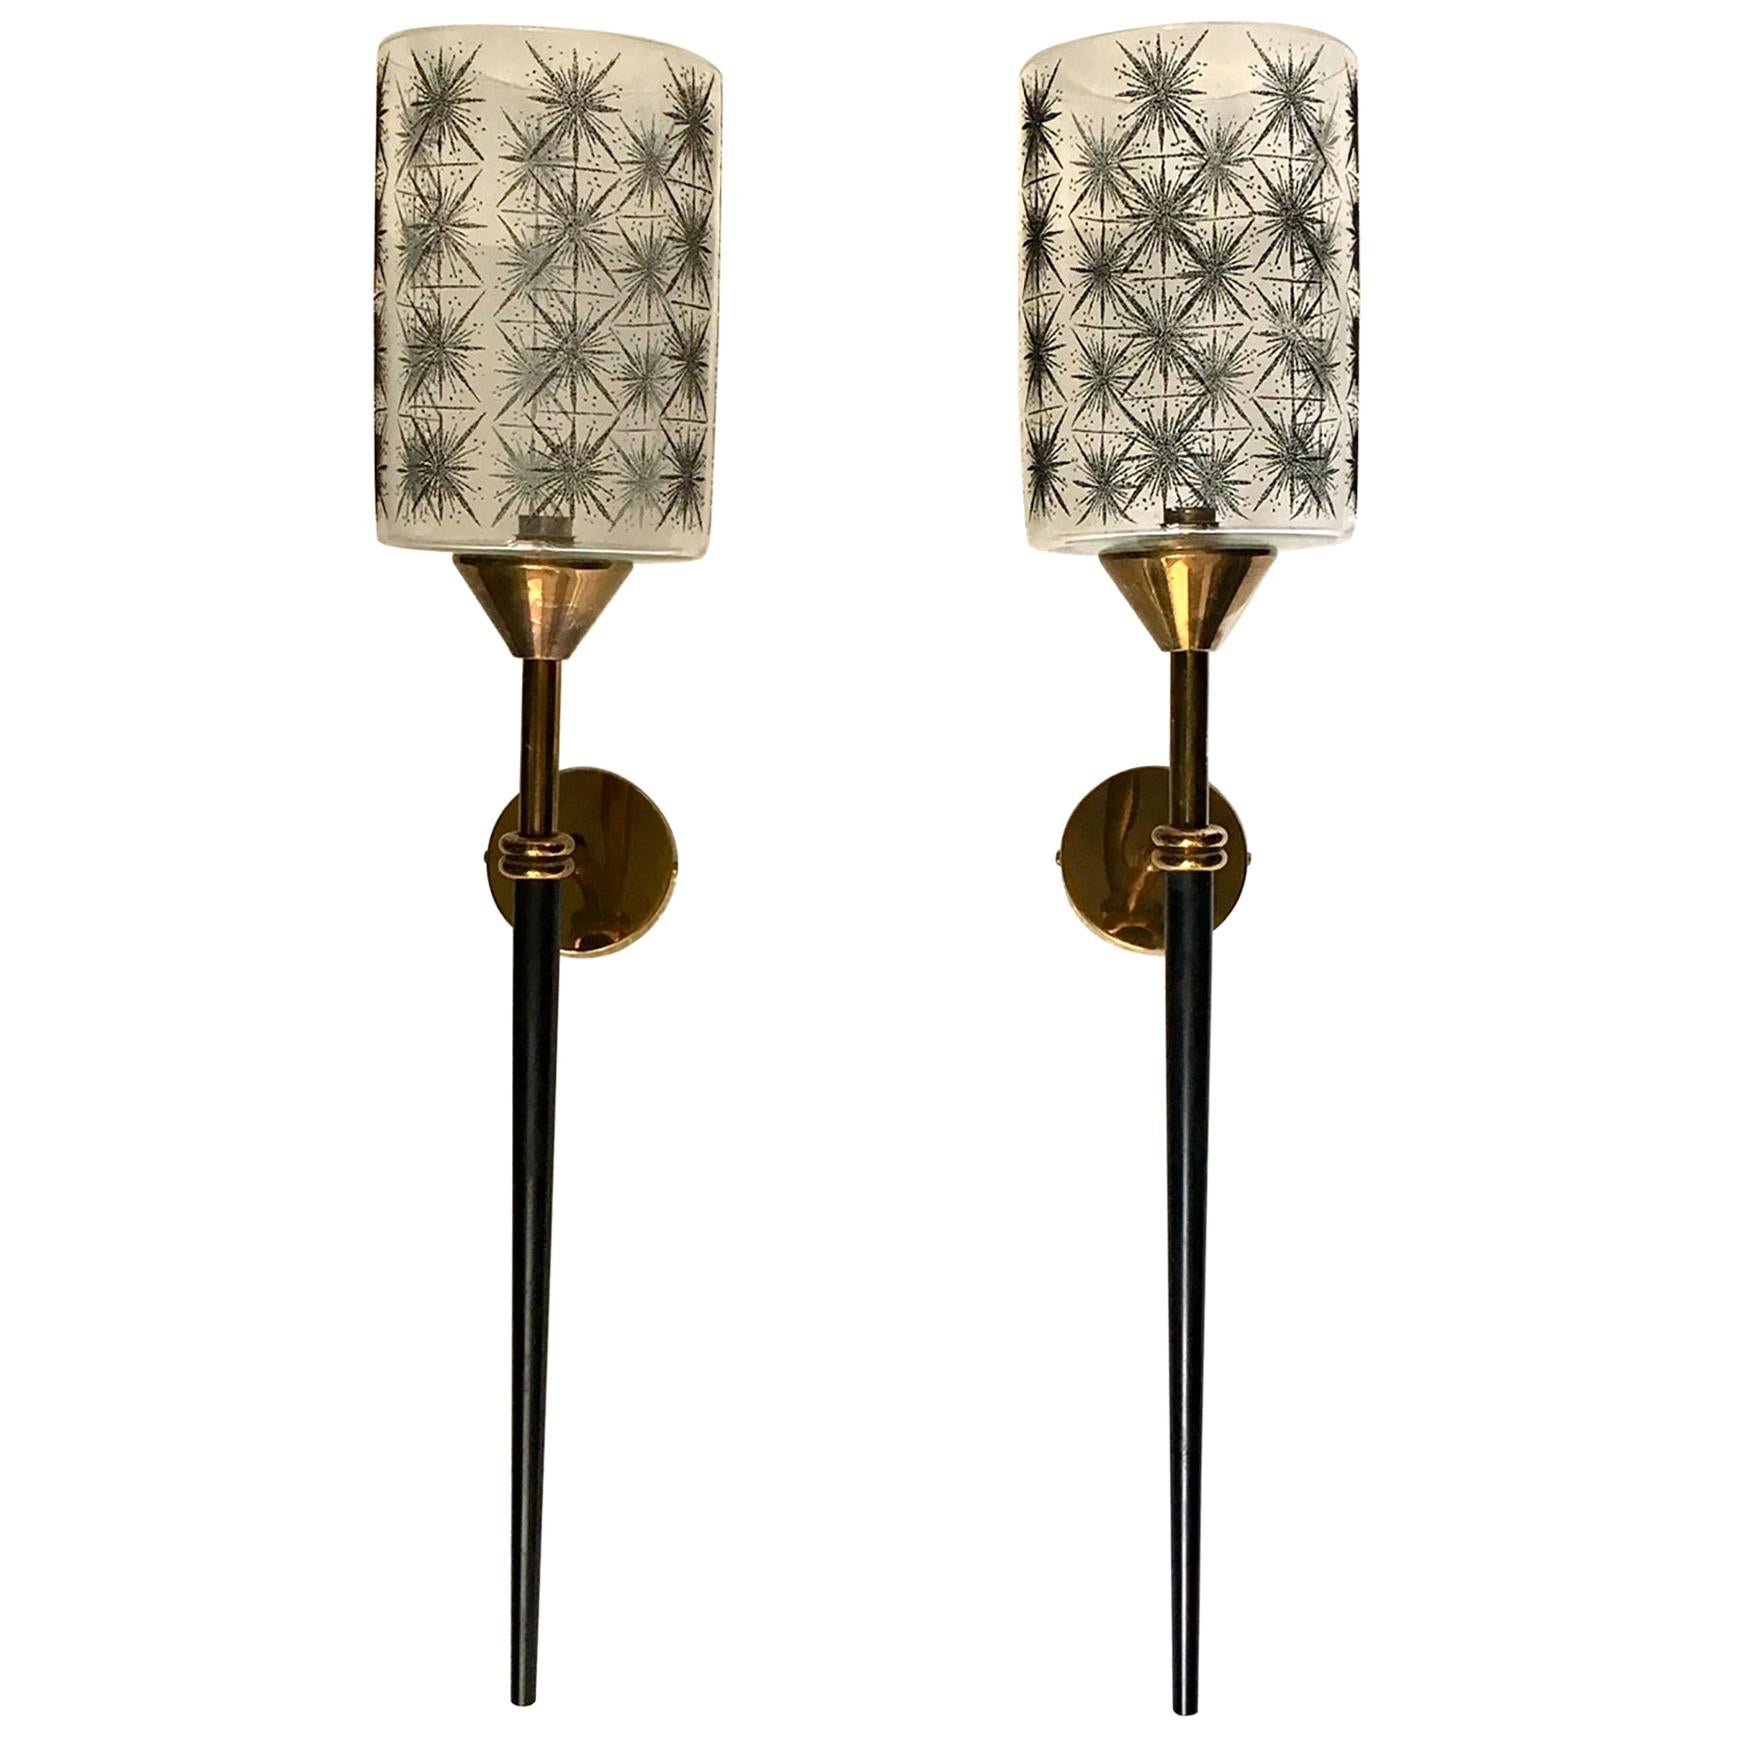 Pair of 1950 French Maison Lunel Brass and Lacquered Torchere Wall Sconces